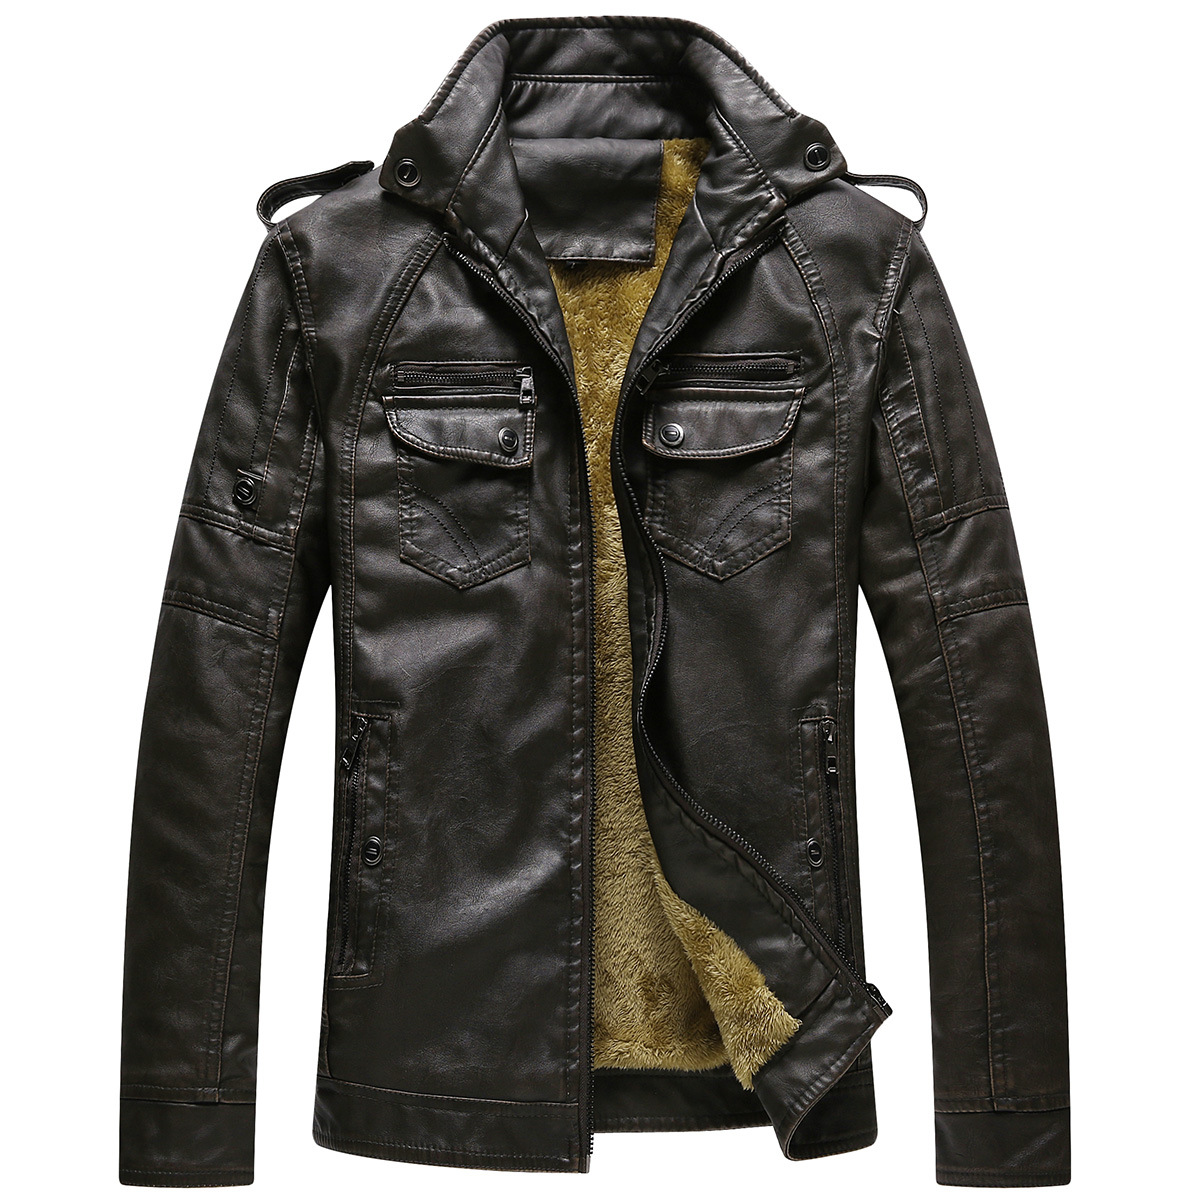 Men's Cool Stylish Stand Collar Lightweight Bomber Faux Leather Jacket Coat Coffee -Front Side